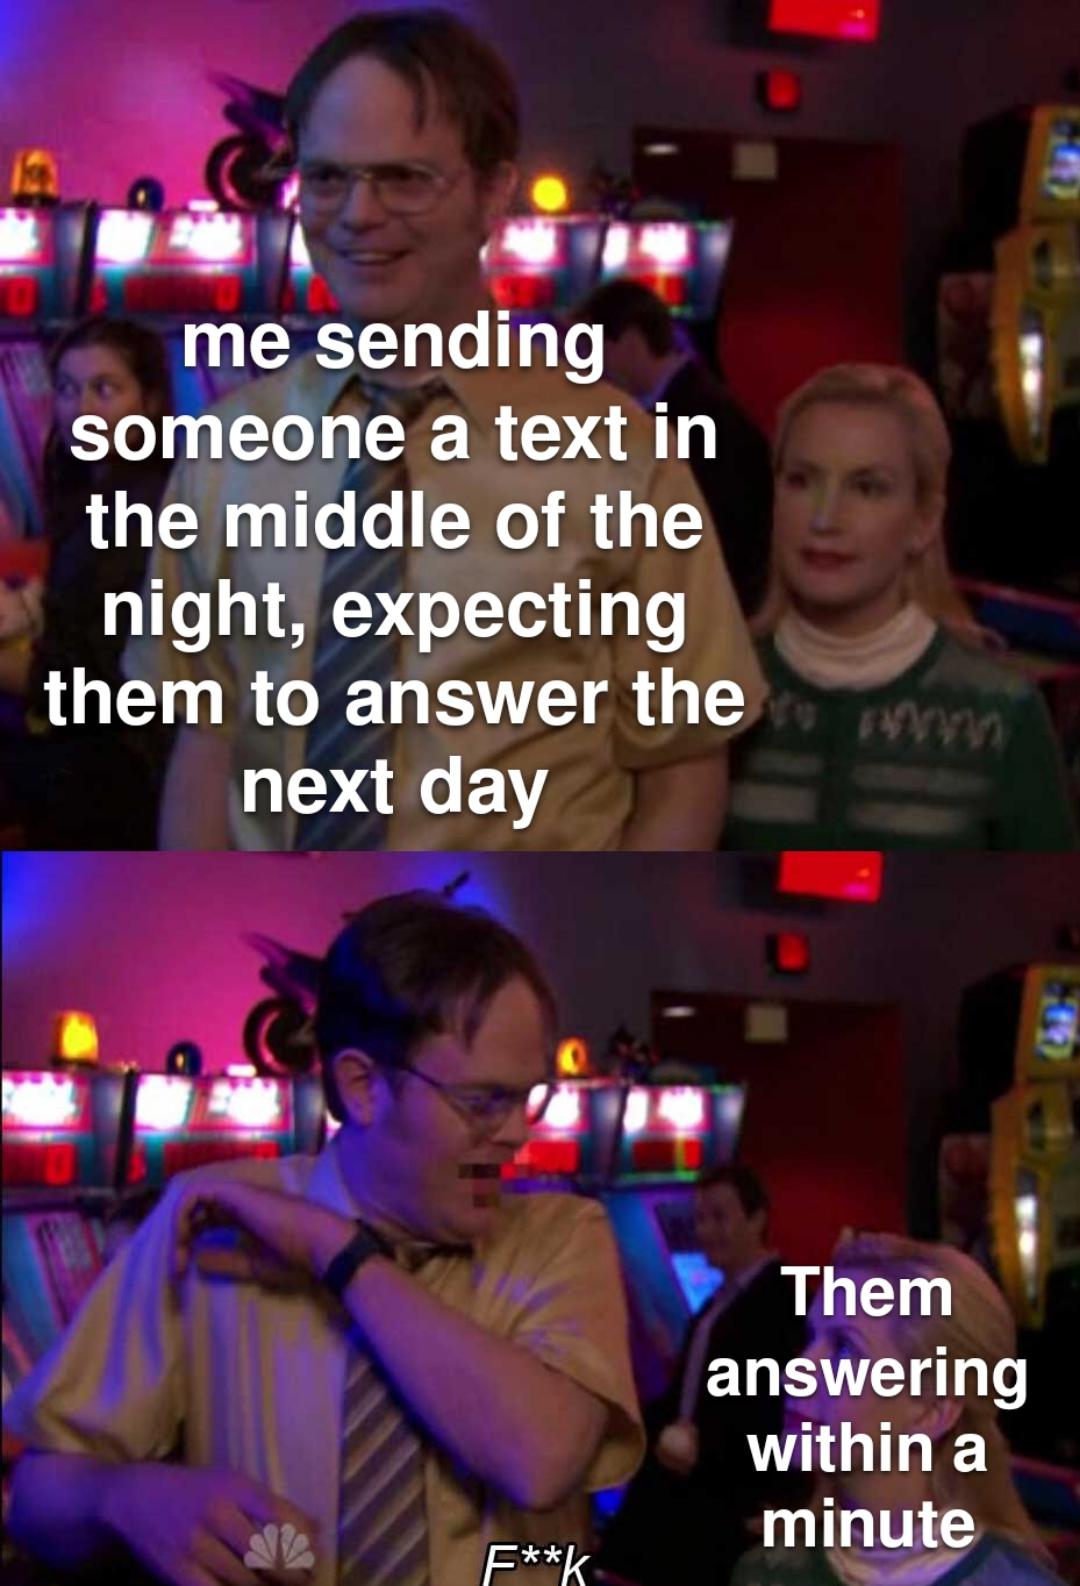 funny memes and pics - sign - me sending someone a text in the middle of the night, expecting them to answer the www next day E Fk Them answering within a minute